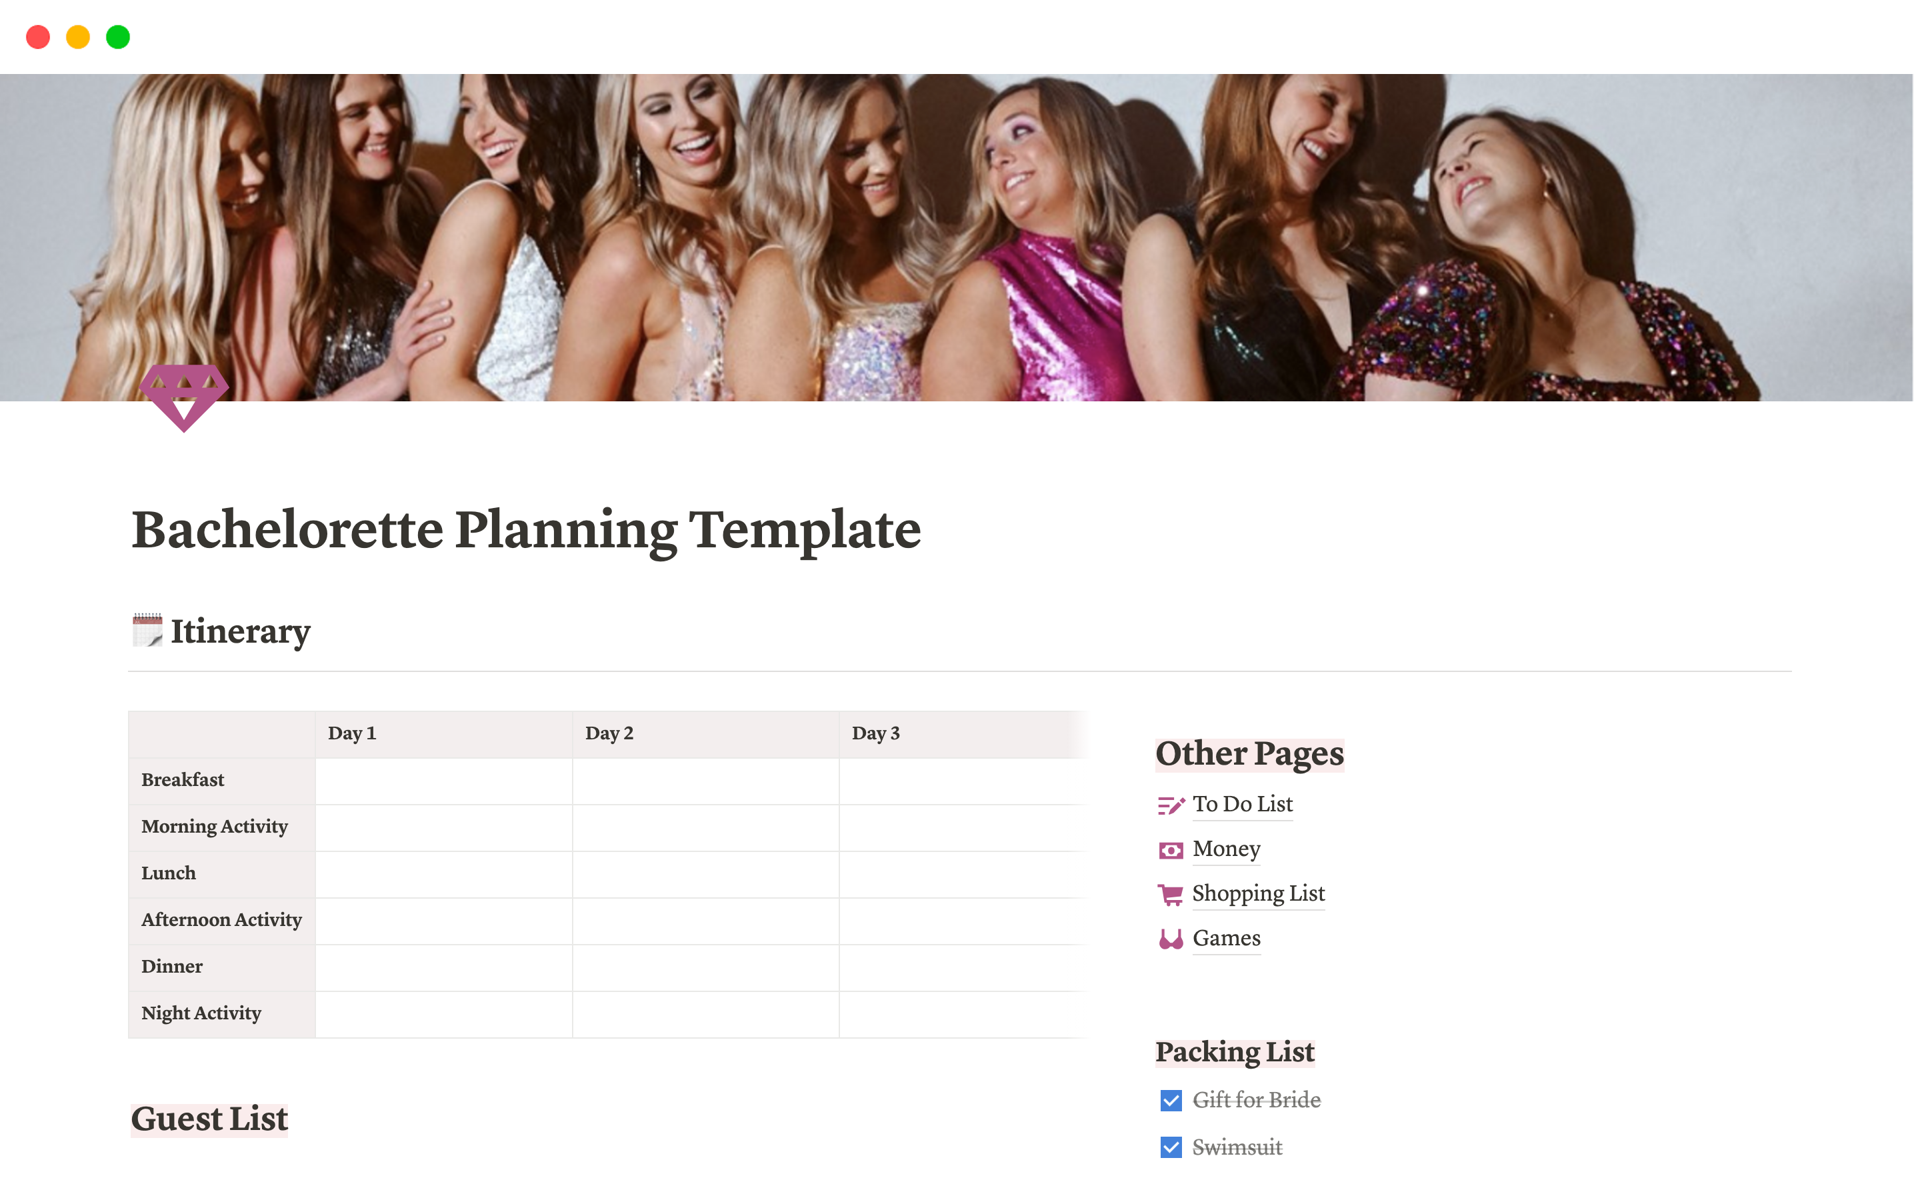 A template preview for Bachelorette Planning Template